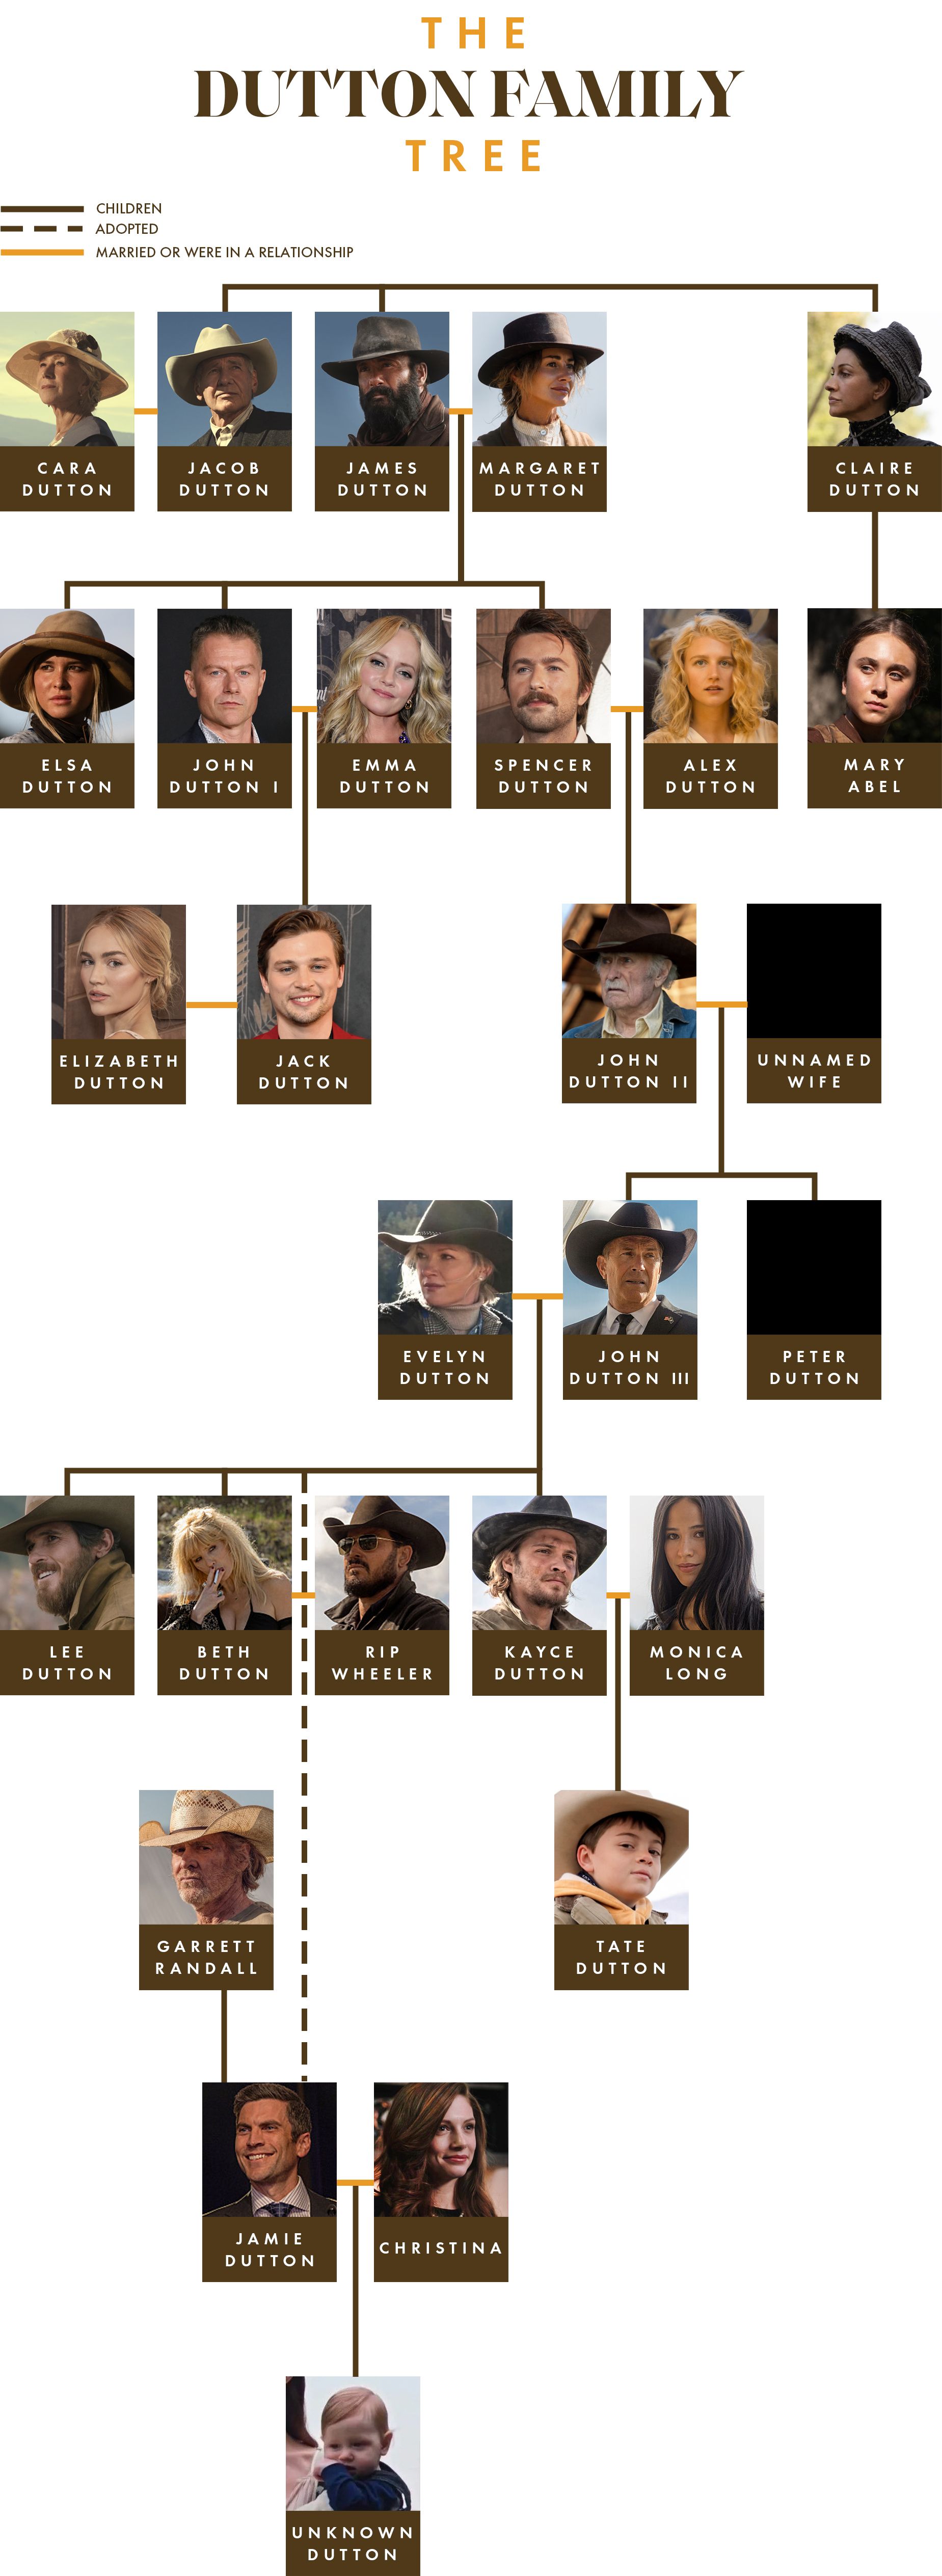 The Dutton Family Tree - Yellowstone, 1923, 1883 Character Guide